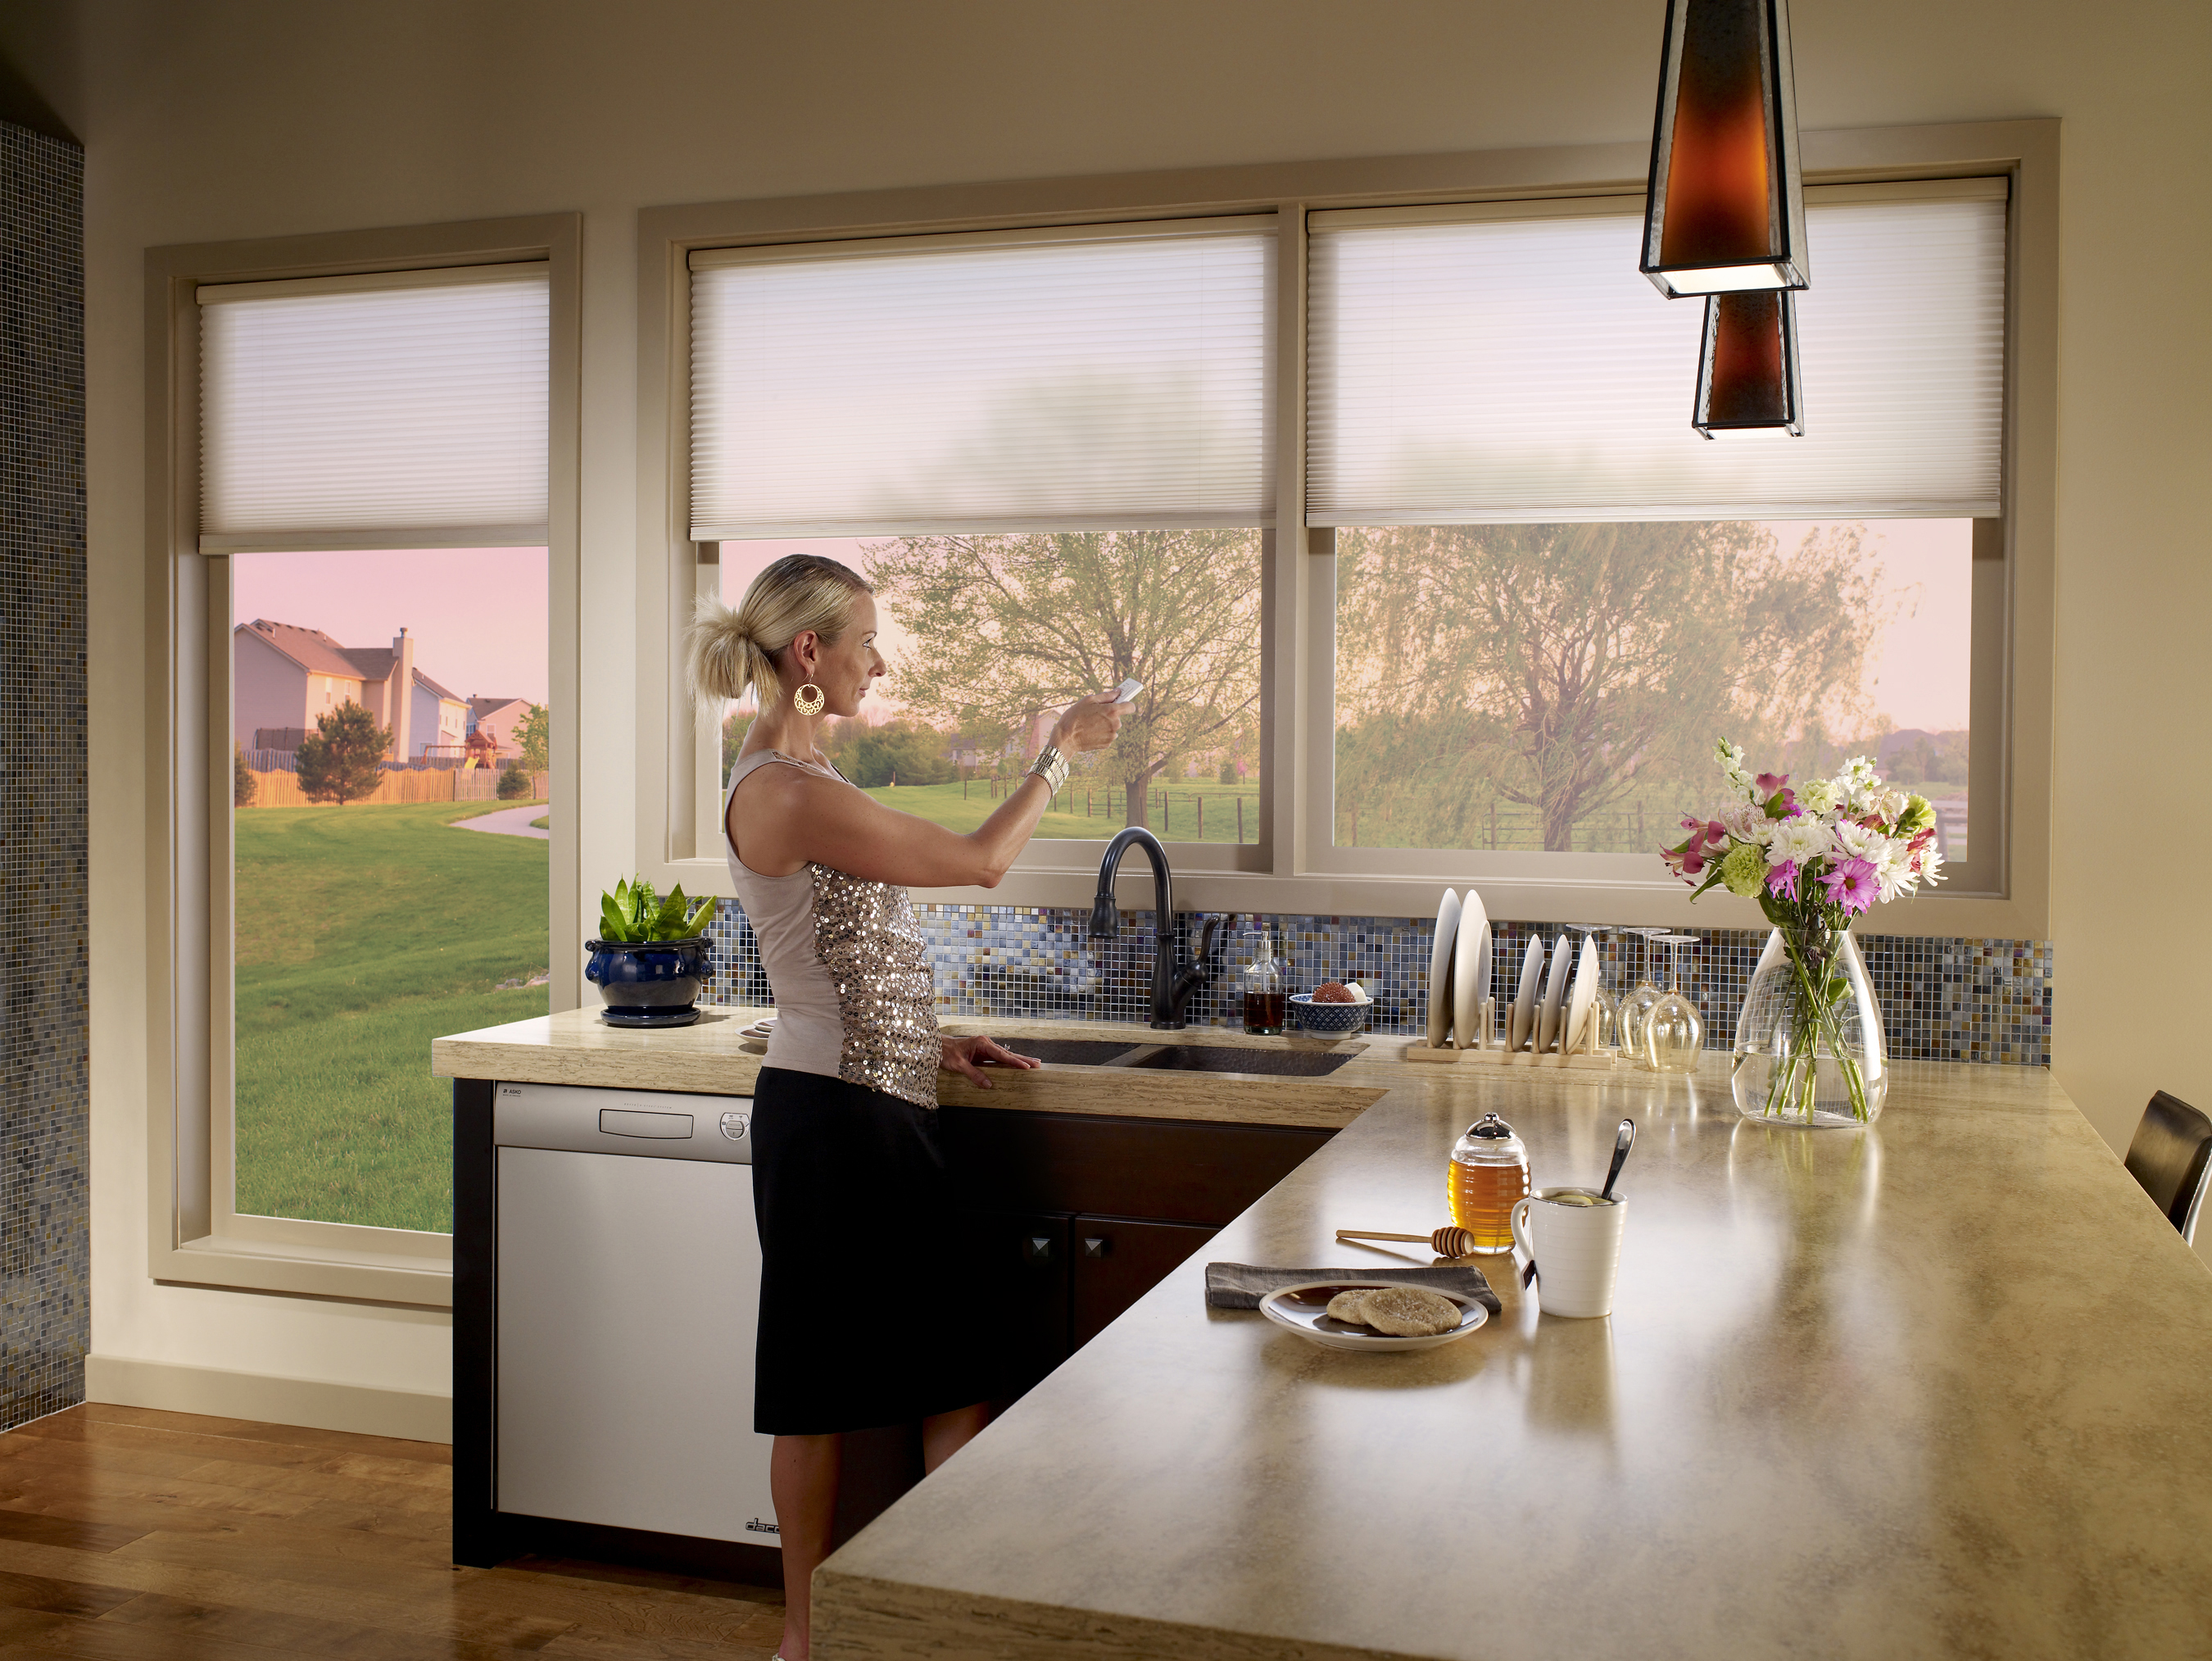 How Can You Experience the Benefits of Motorized Shades?